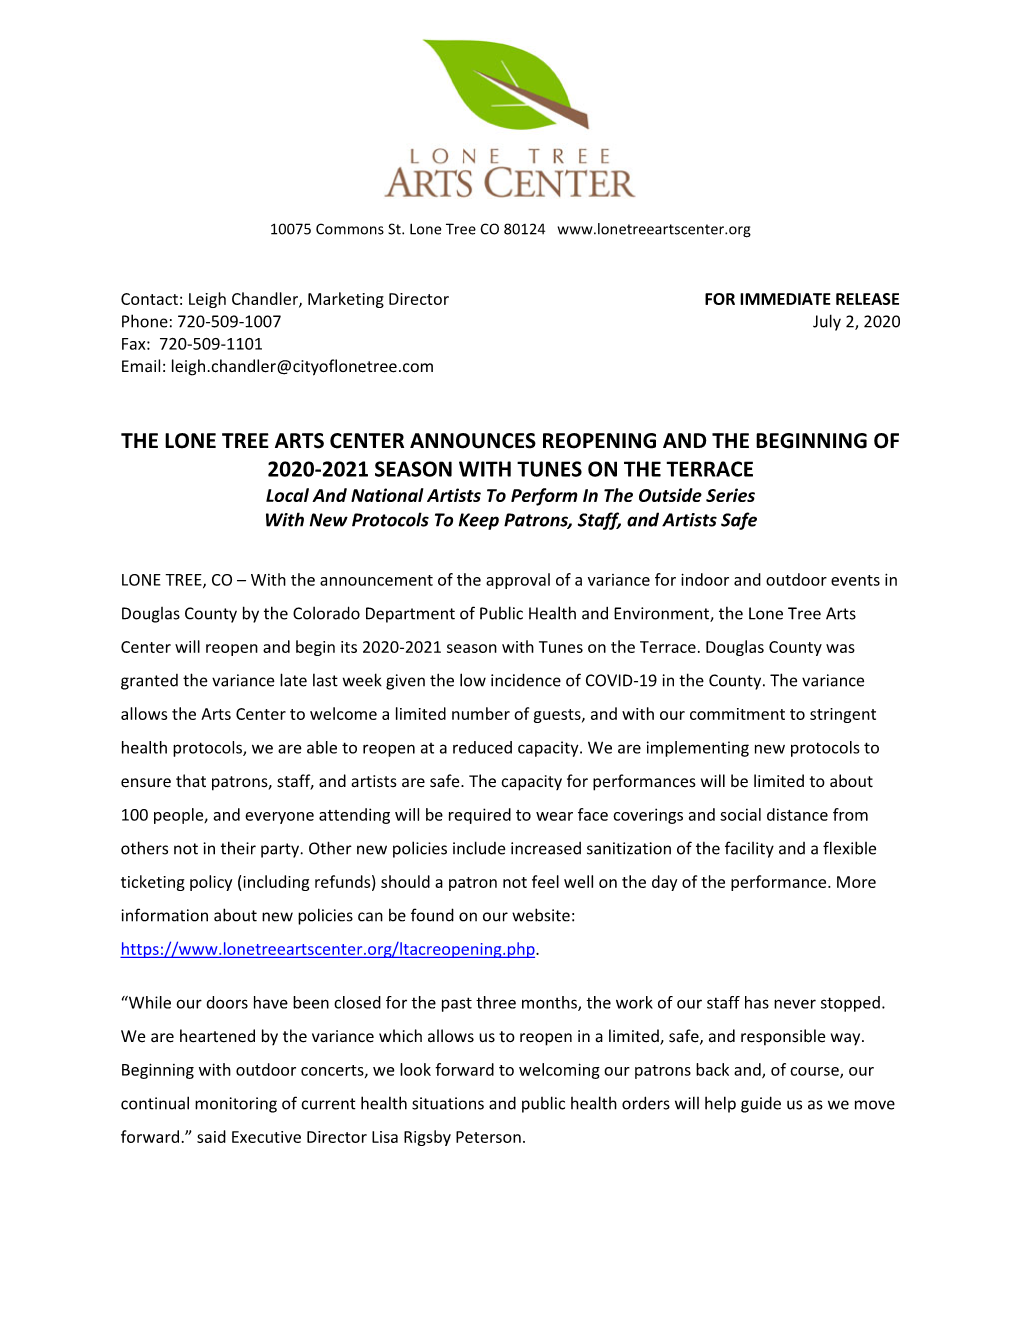 The Lone Tree Arts Center Announces Reopening and the Beginning Of